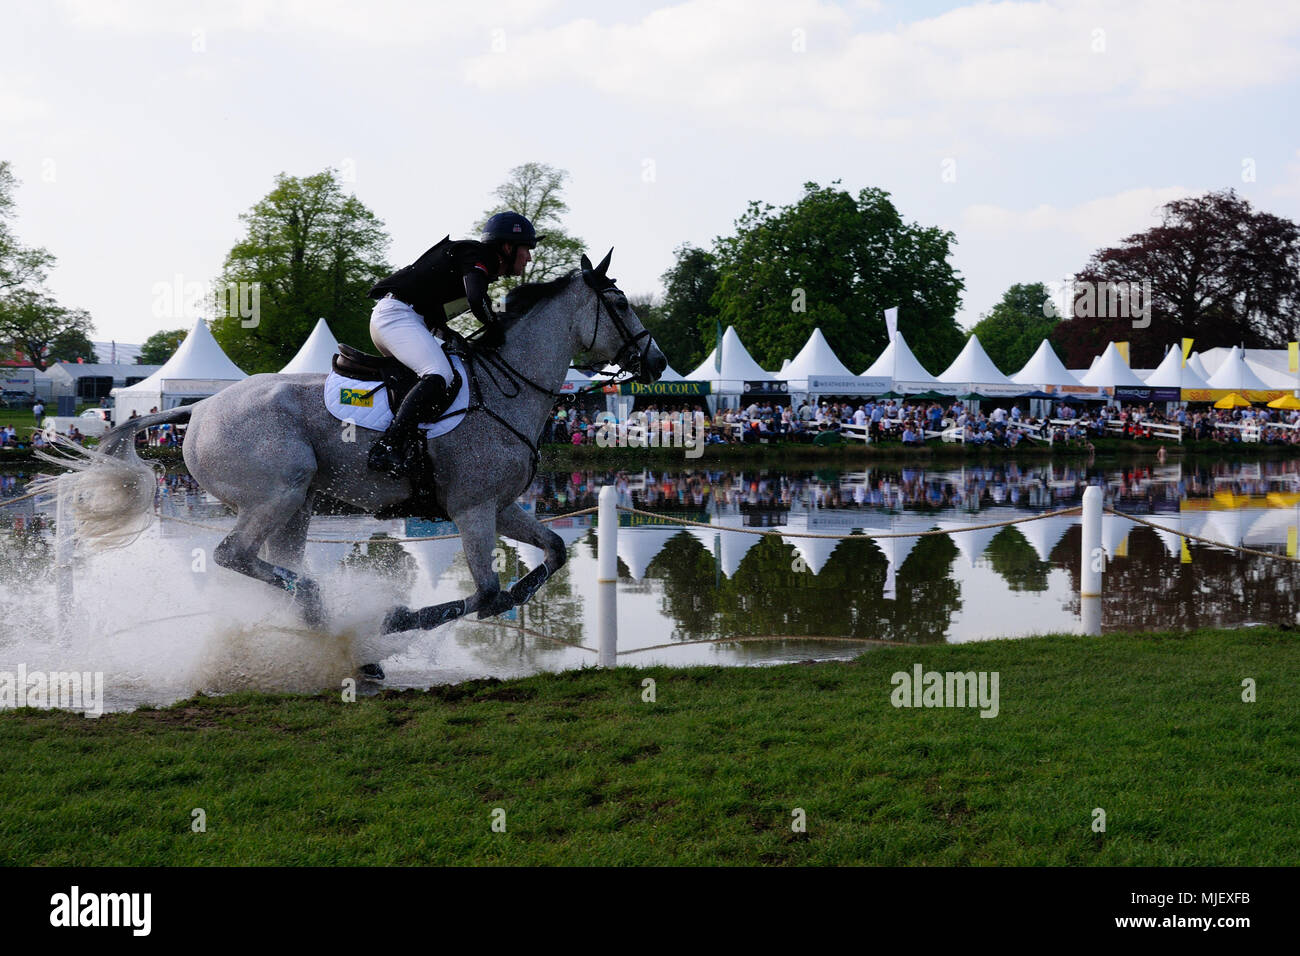 Gloucestershire, UK.5th May 2018. Oliver Townend riding Ballaghmor Class during the Cross Country Phase of the 2018 Mitsubishi Motors Badminton Horse Trials, Badminton, United Kingdom. Jonathan Clarke/Alamy Live News Stock Photo